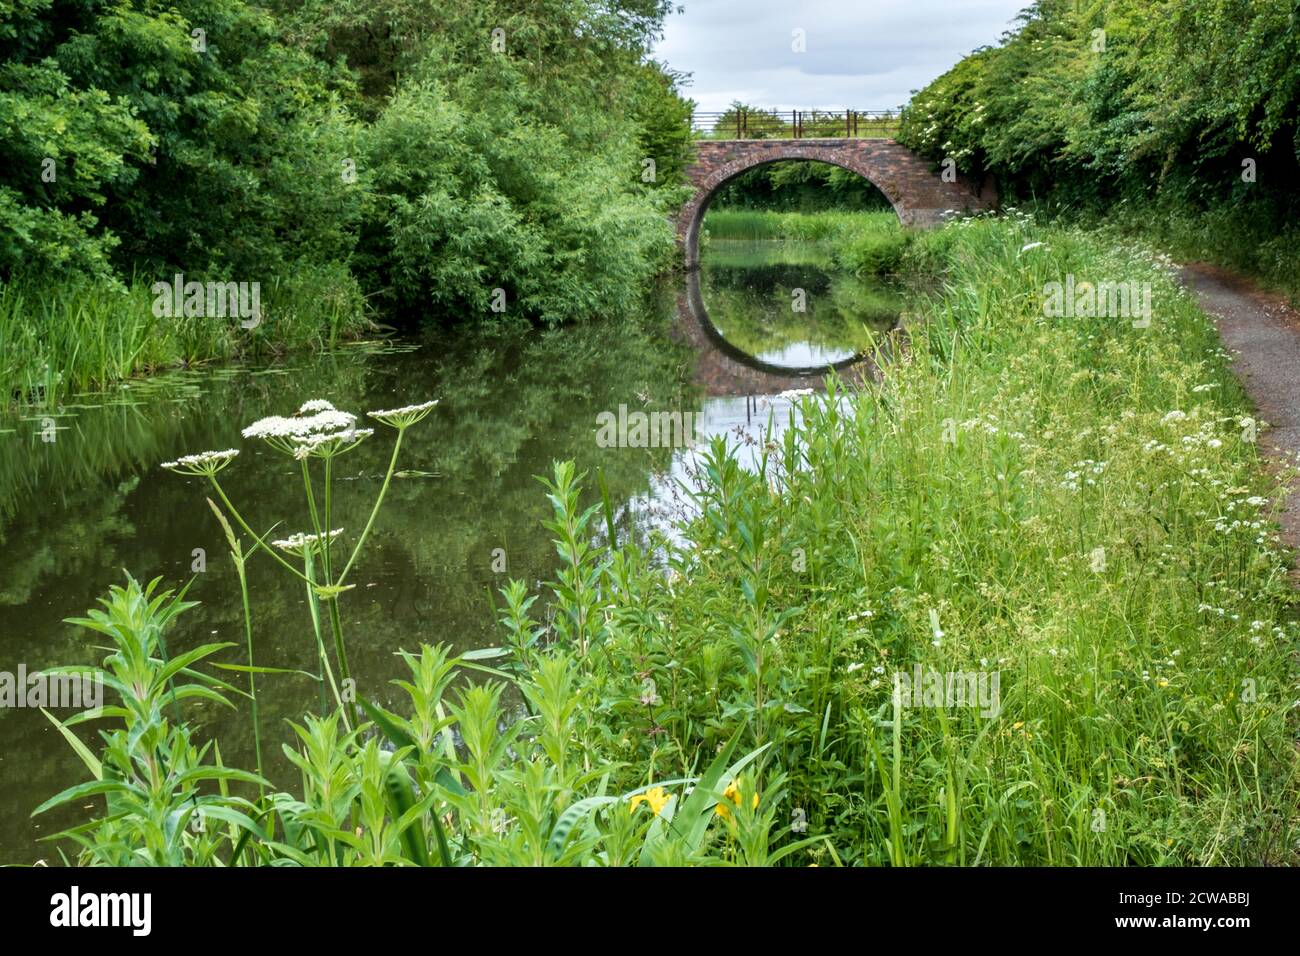 Sedgleys Bridge 9 over the Grand Union Canal near Great Bowden, Leicestershire, England. Stock Photo